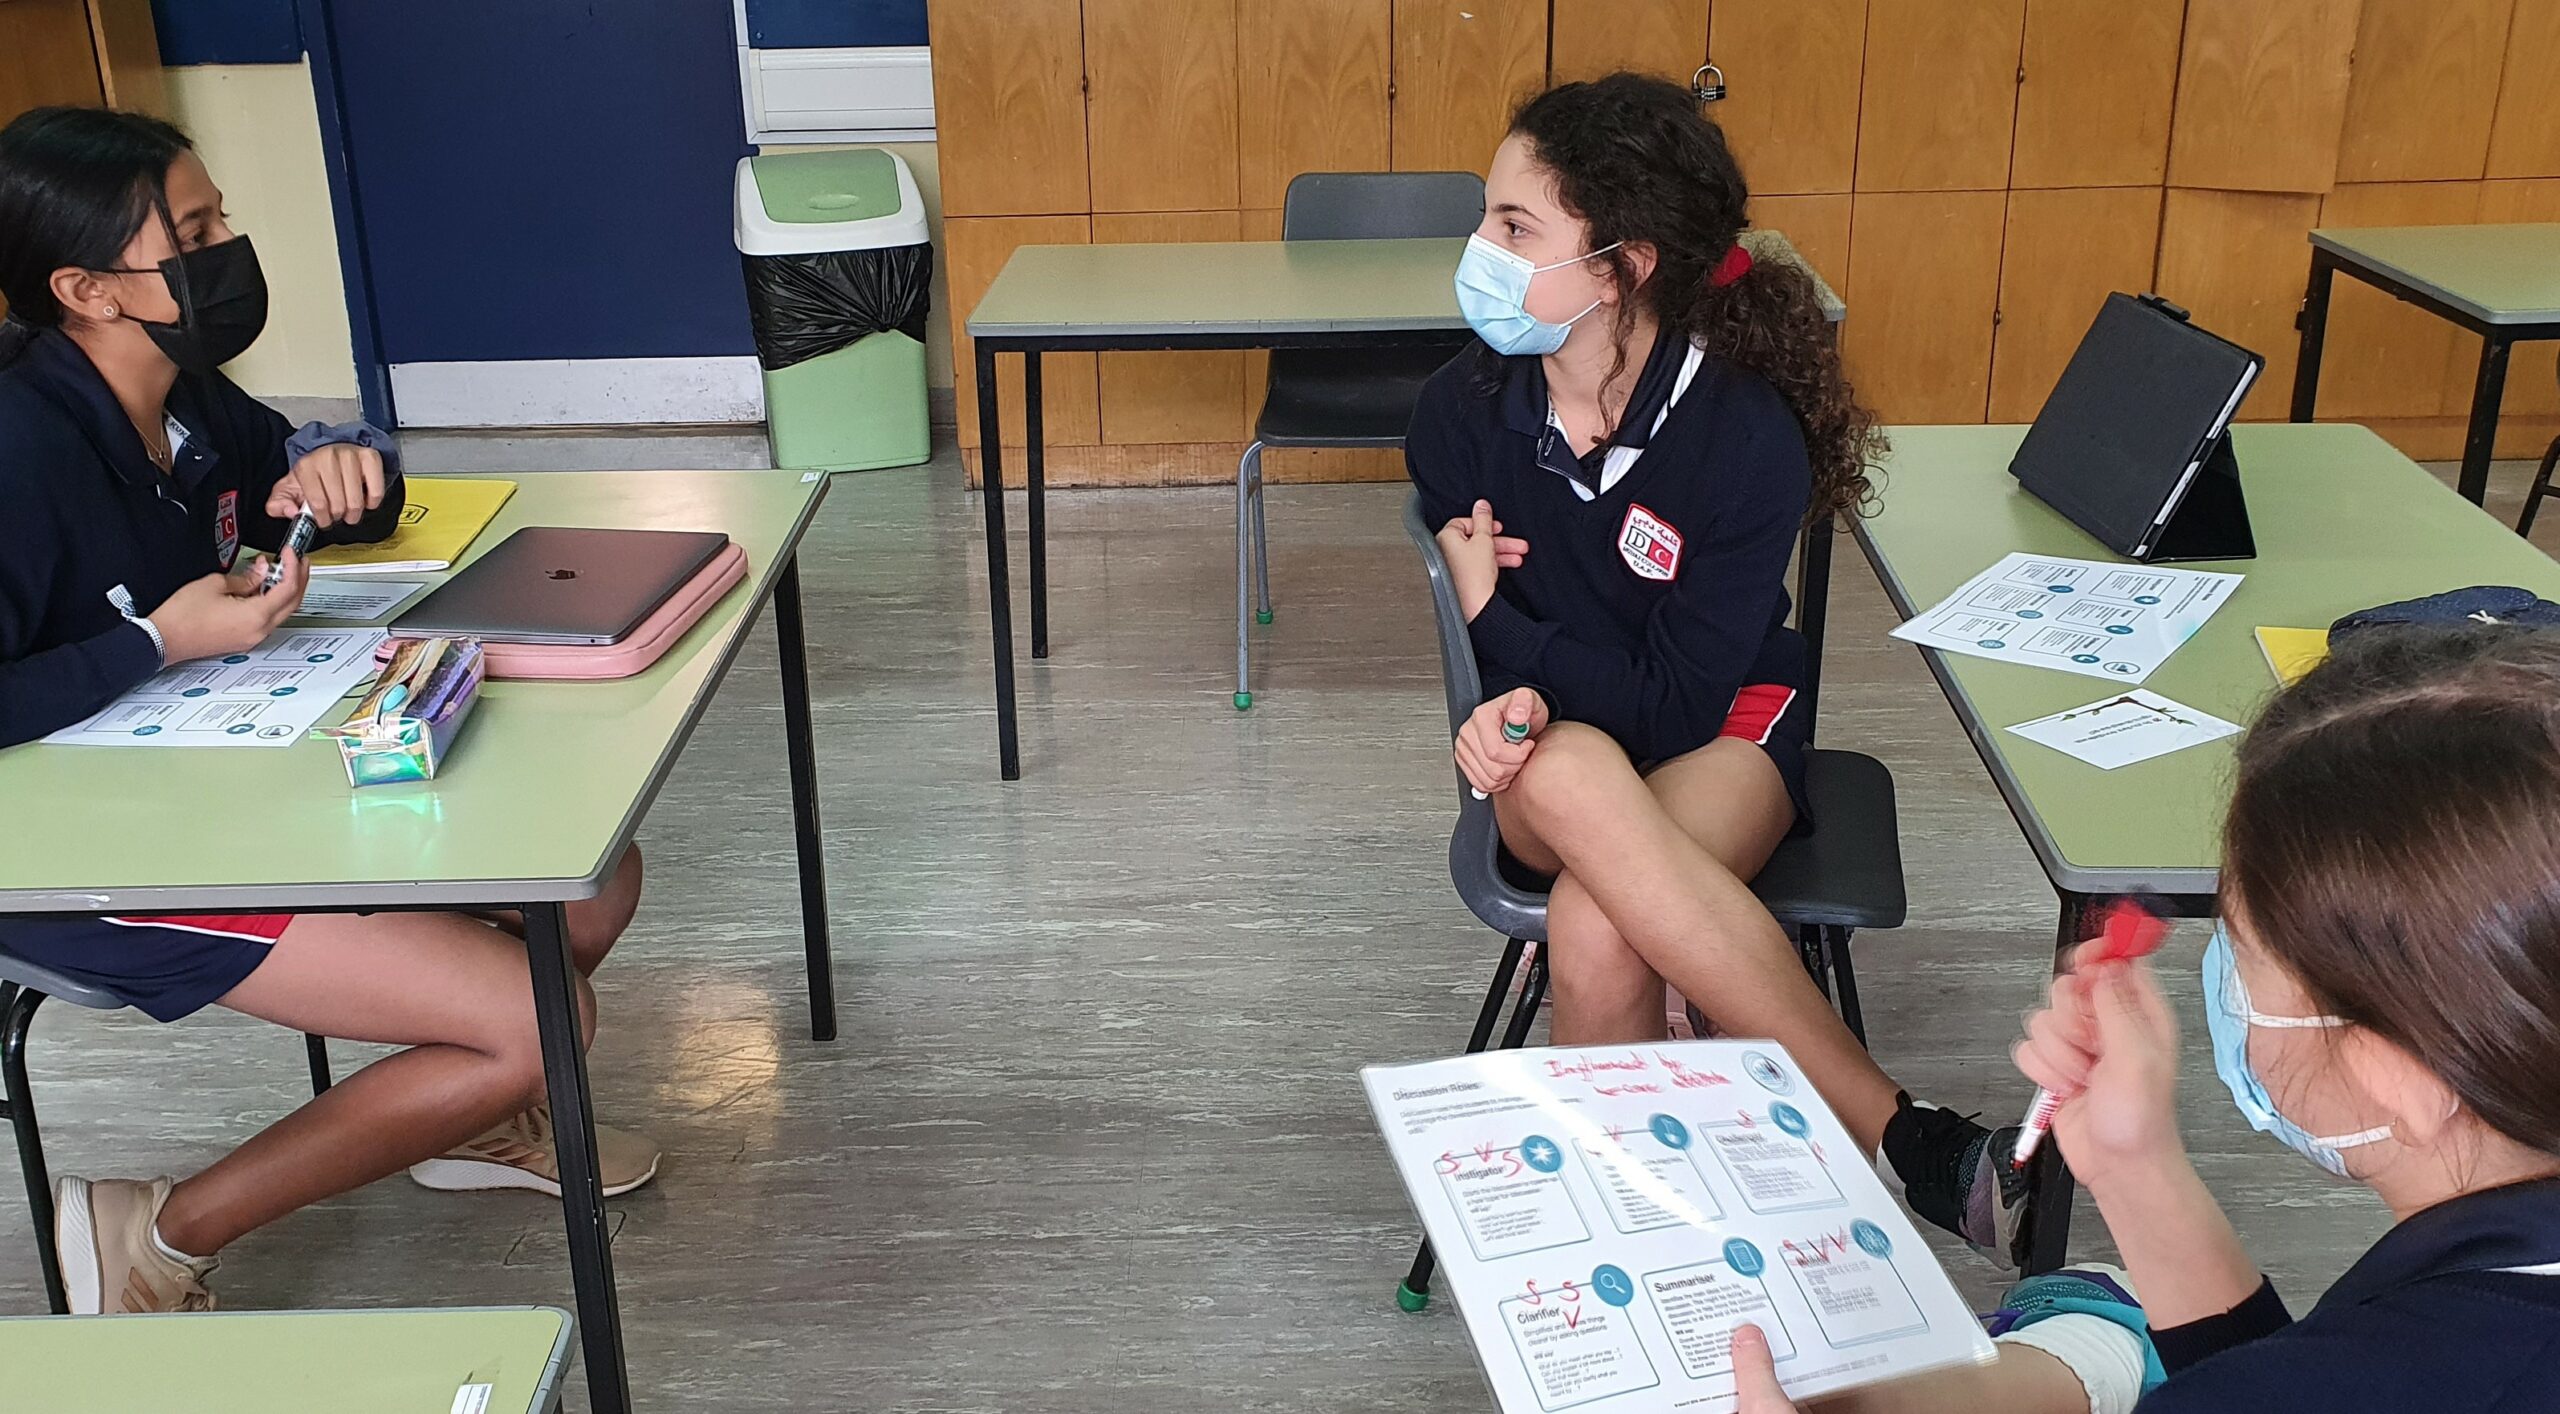 Oracy classes continued at Dubai College throughout the Covid 19 pandemic given its importance within the curriculum and positive impact on student learning